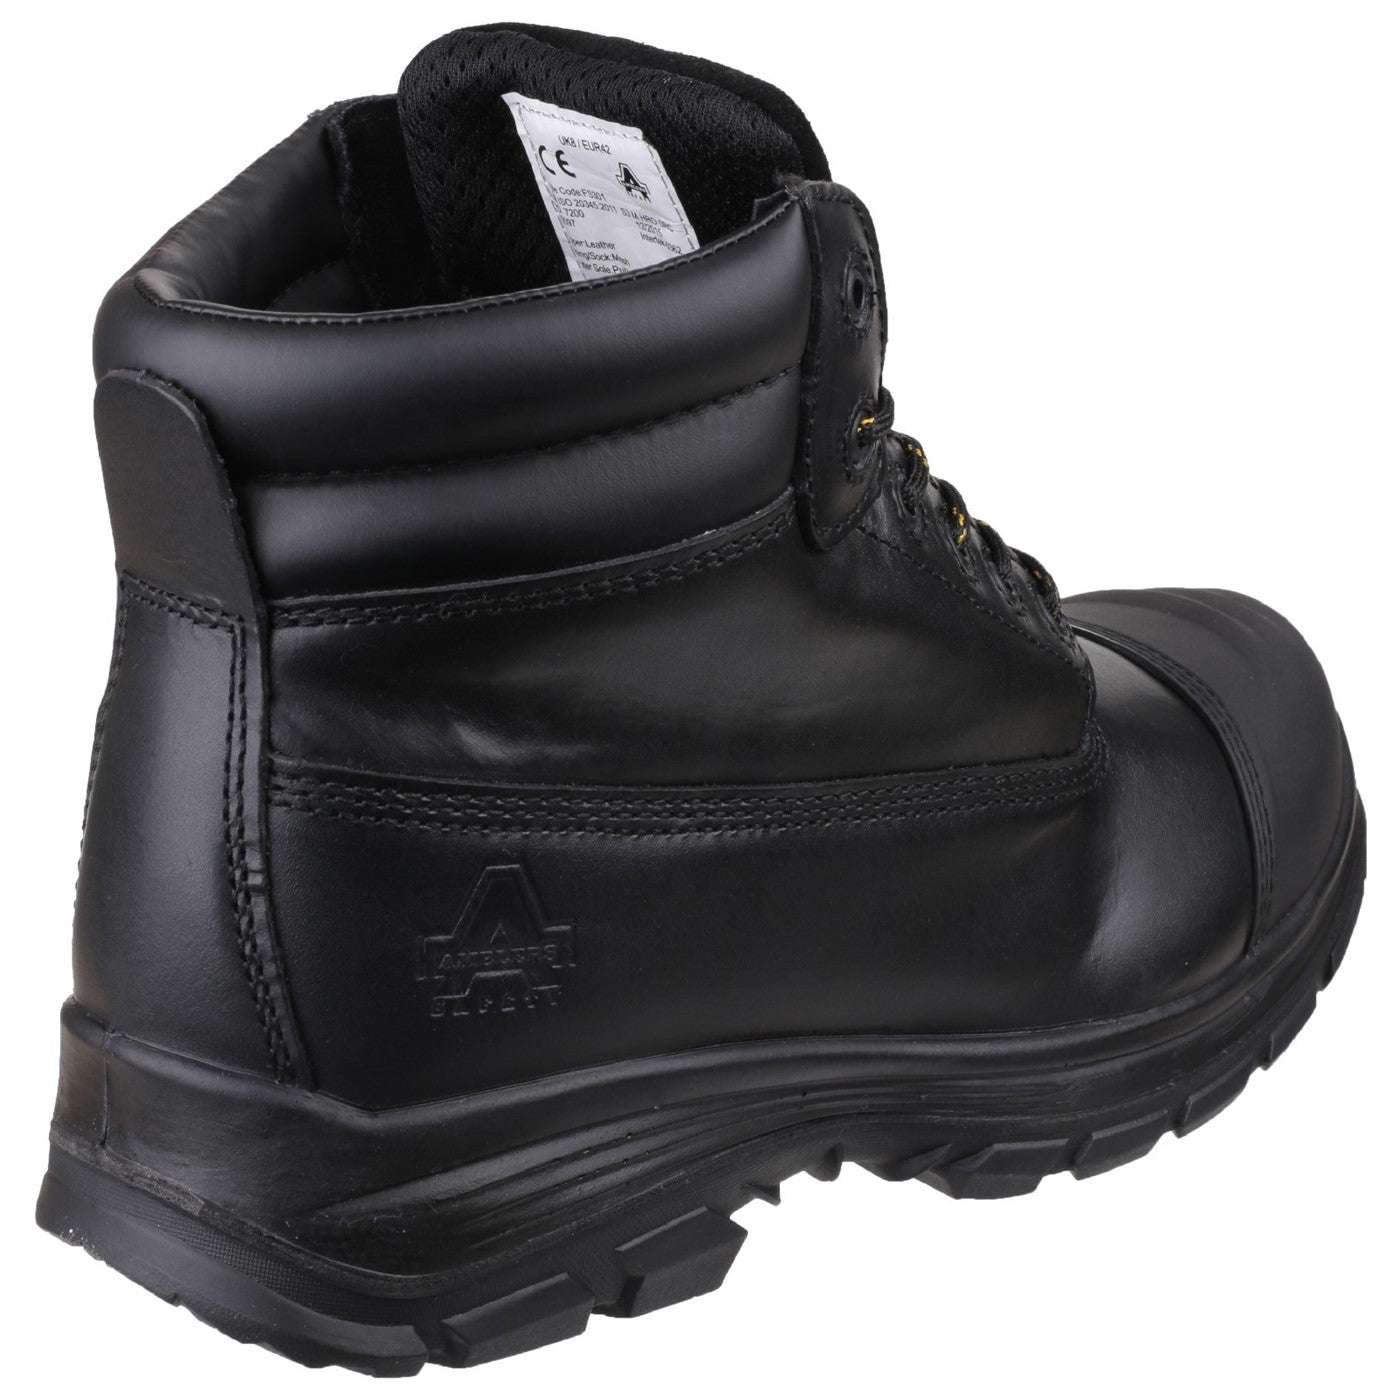 Men's Amblers Safety FS301 Brecon Metatarsal Guard Safety Boot